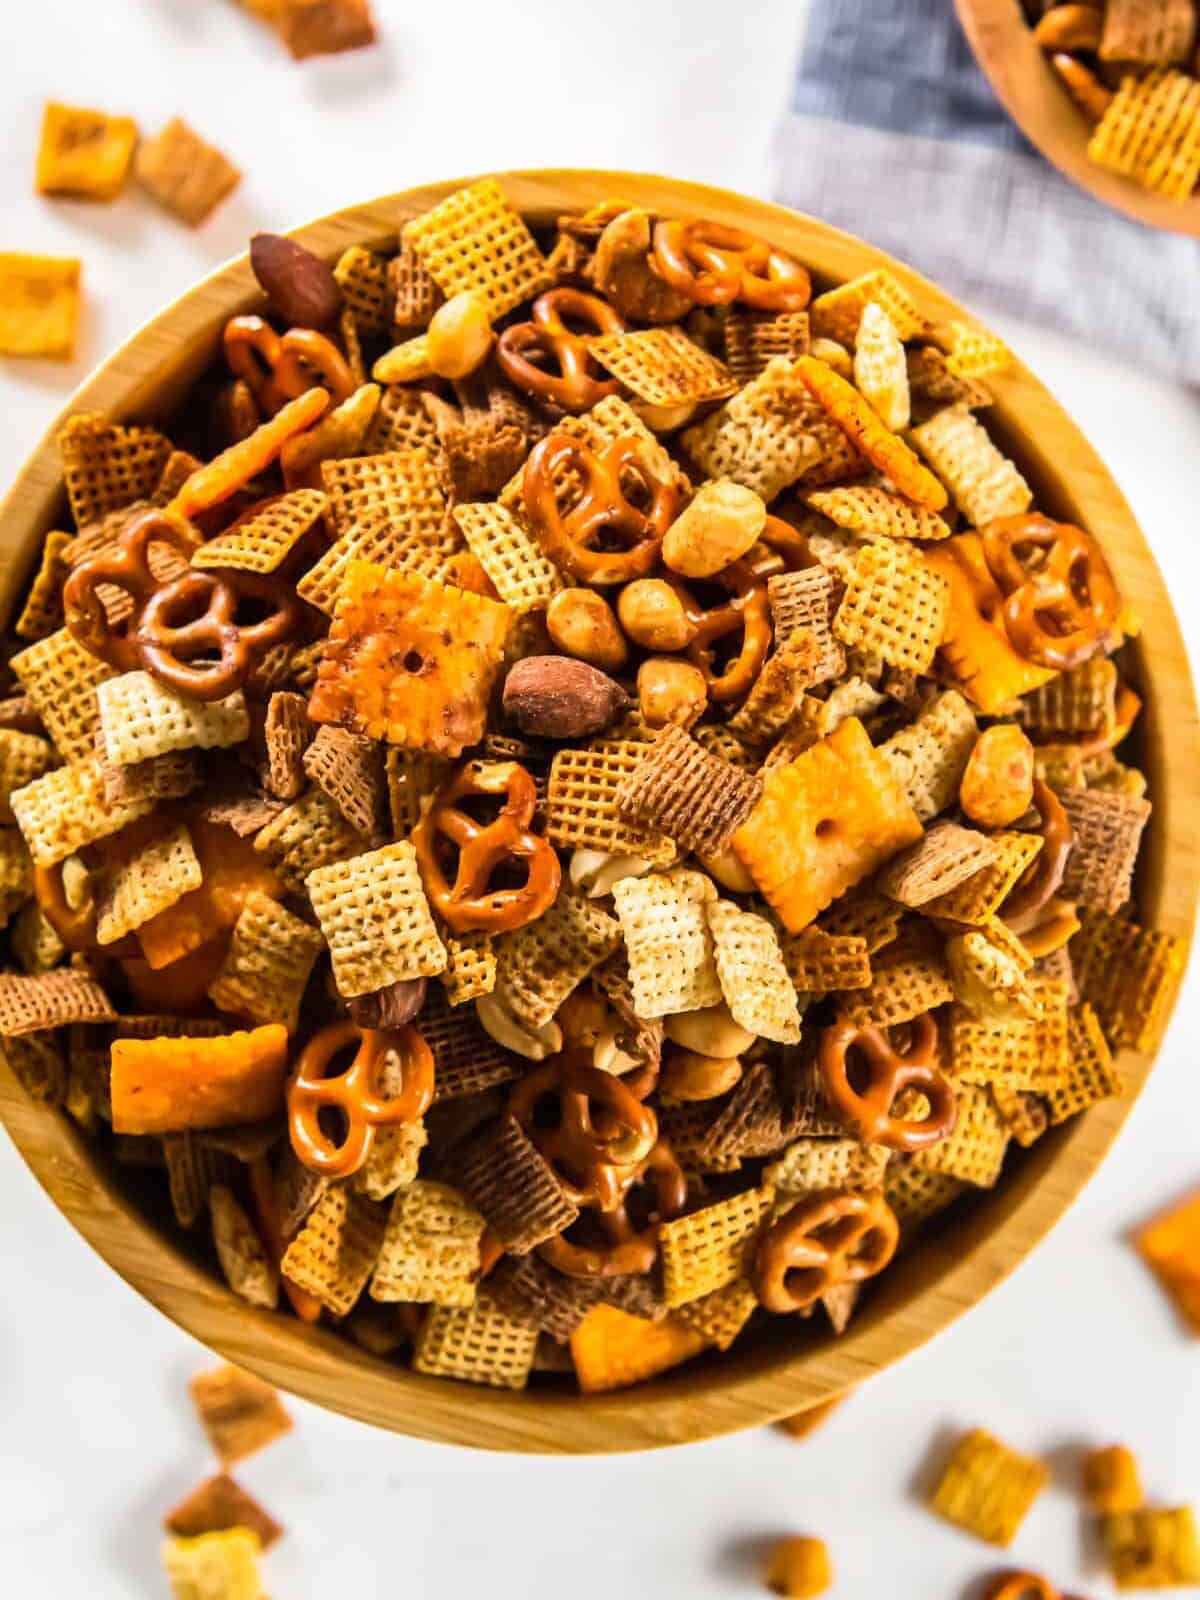 chex mix in a wood bowl